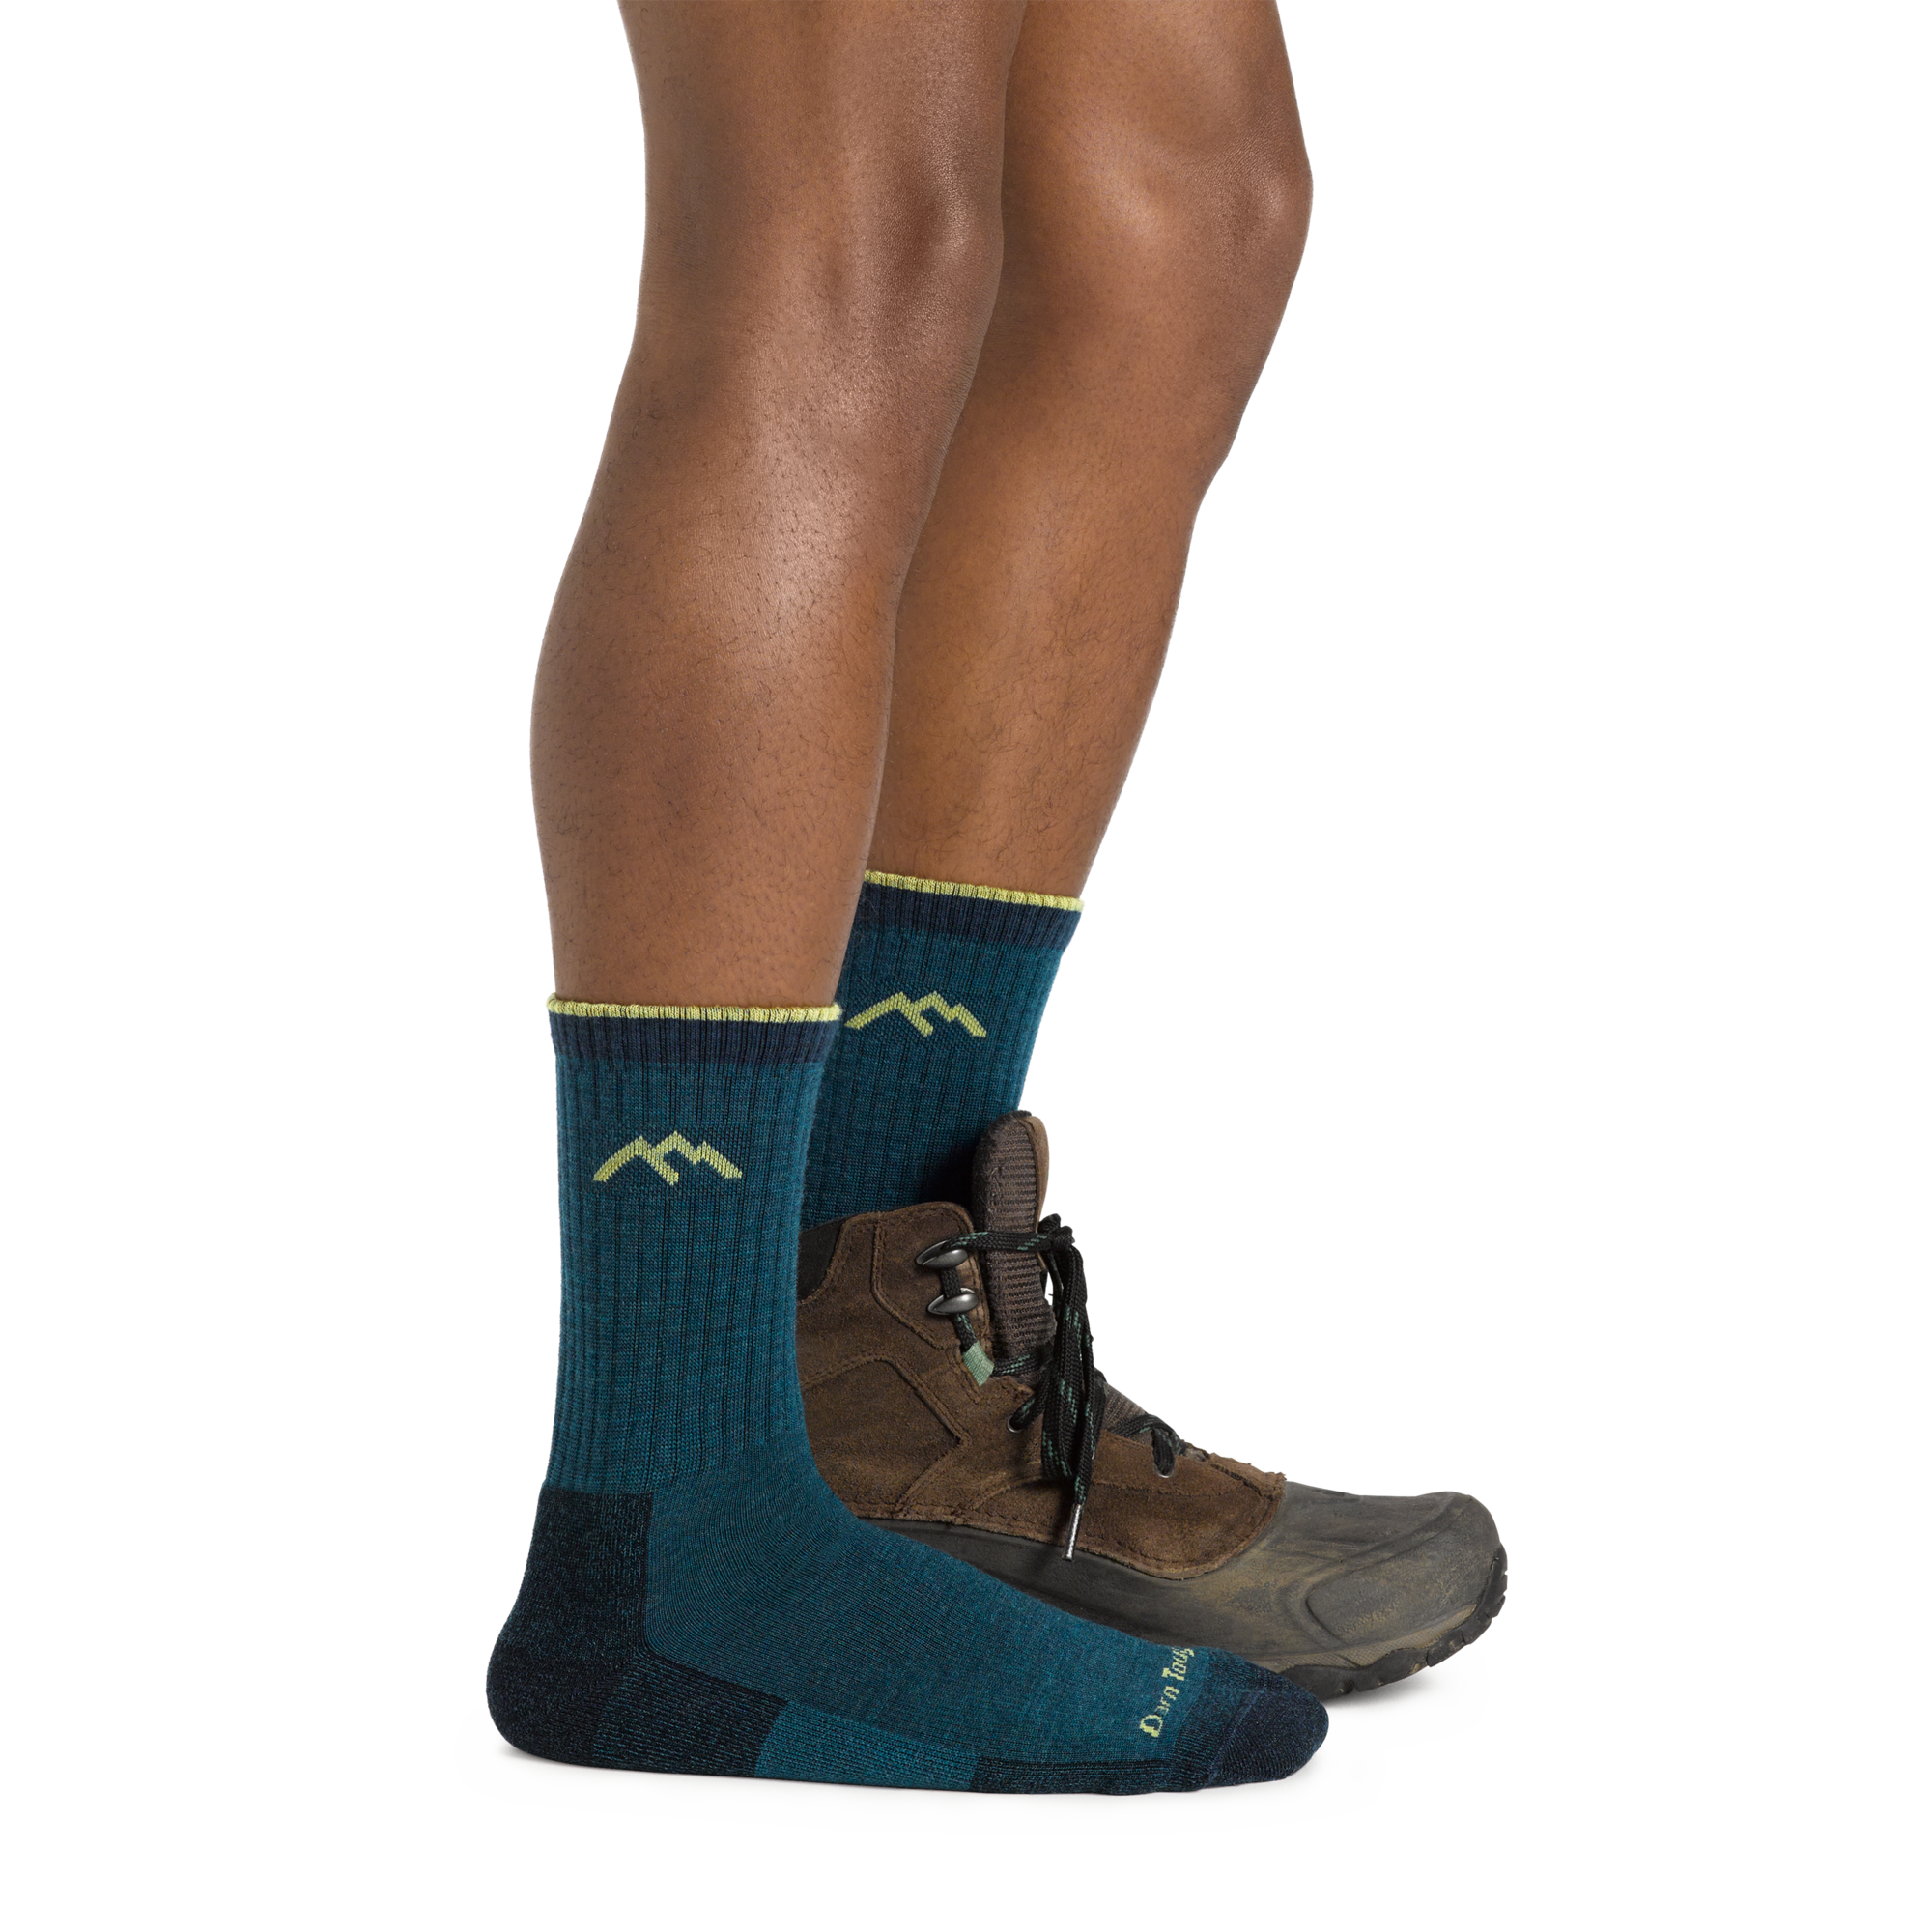 Profile of male legs facing to the right, front foot wearing Hiker Micro Crew Midweight Hiking Sock in Dark Teal, foot in back also wearing a hiking shoe